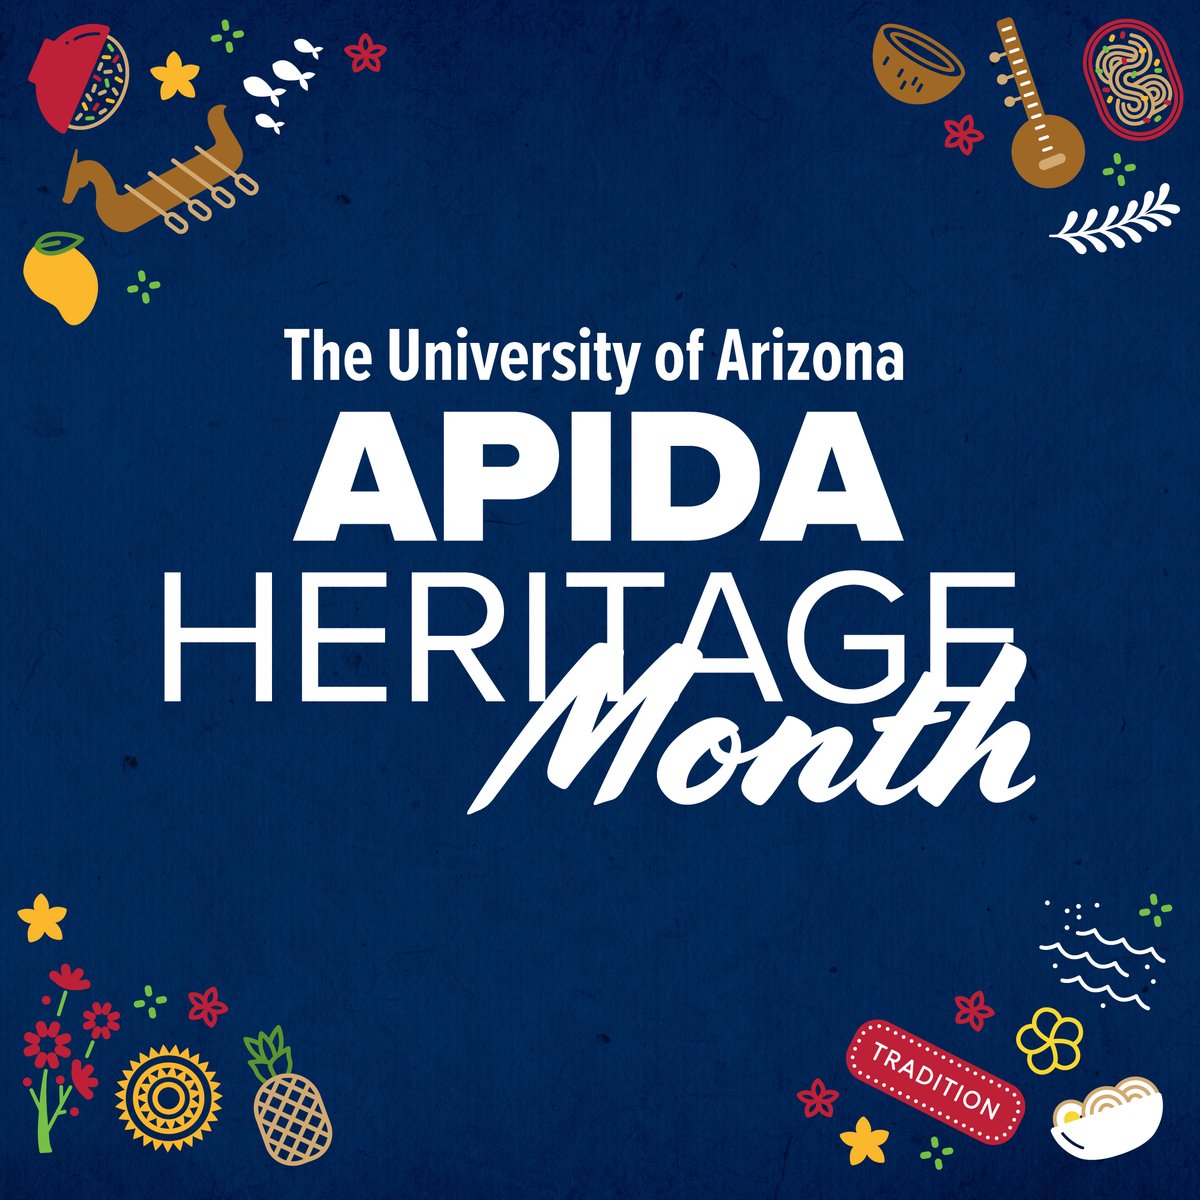 Happy #APIDAHeritageMonth! Join Arizona Athletics as we highlight our Asian, Pacific Islander and Desi American student-athletes all month long!